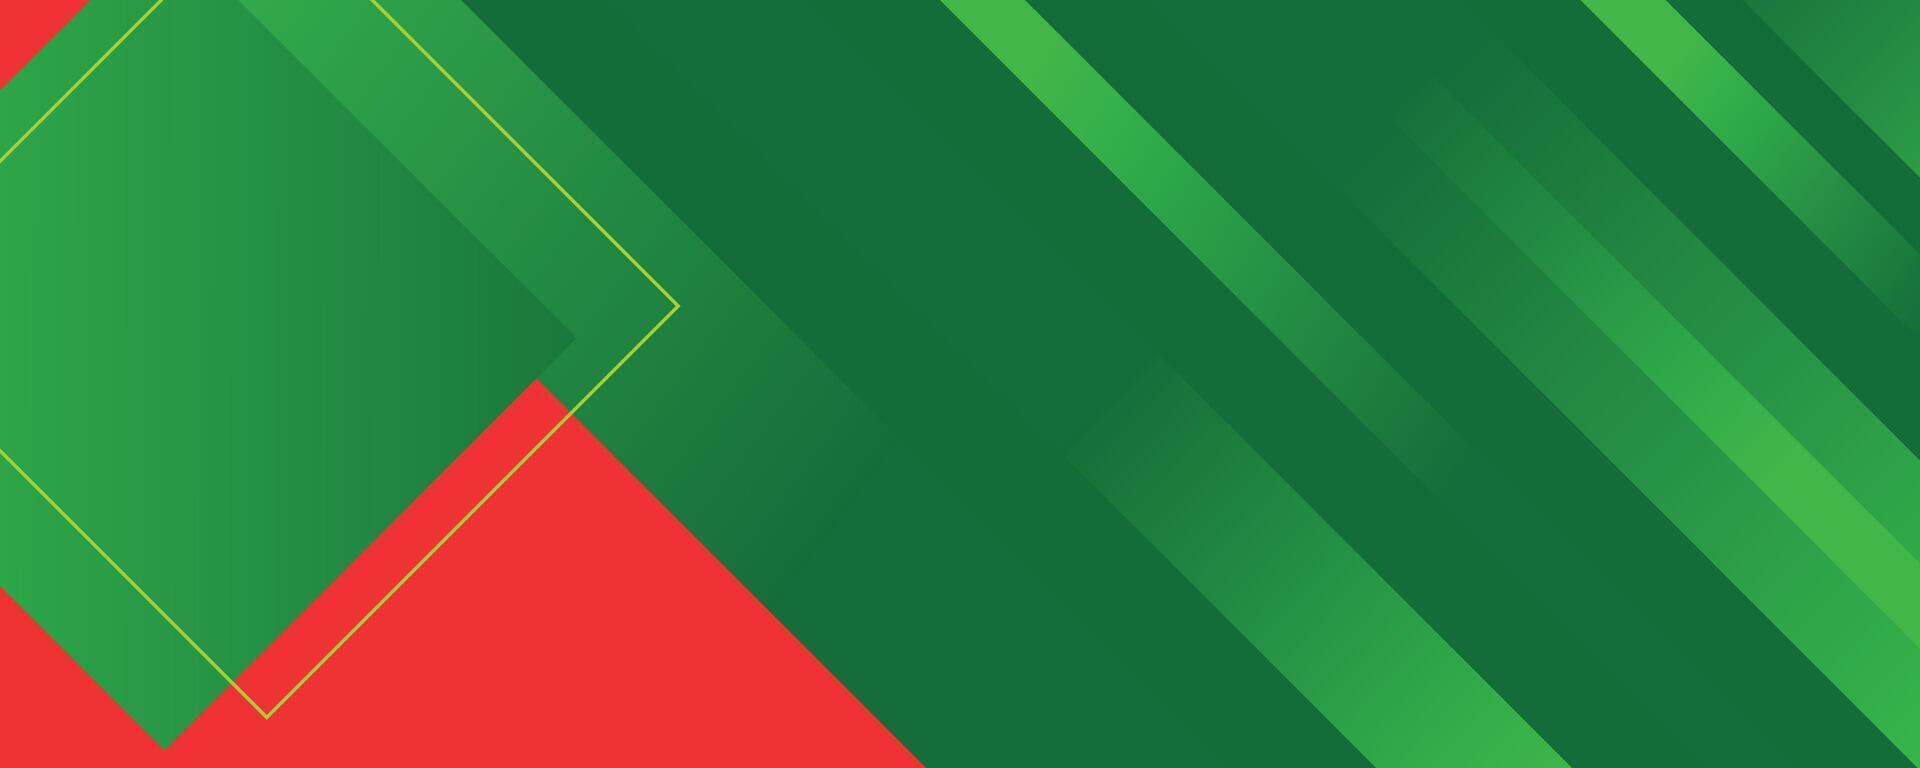 Abstract green and red geometric and stripes banner background vector